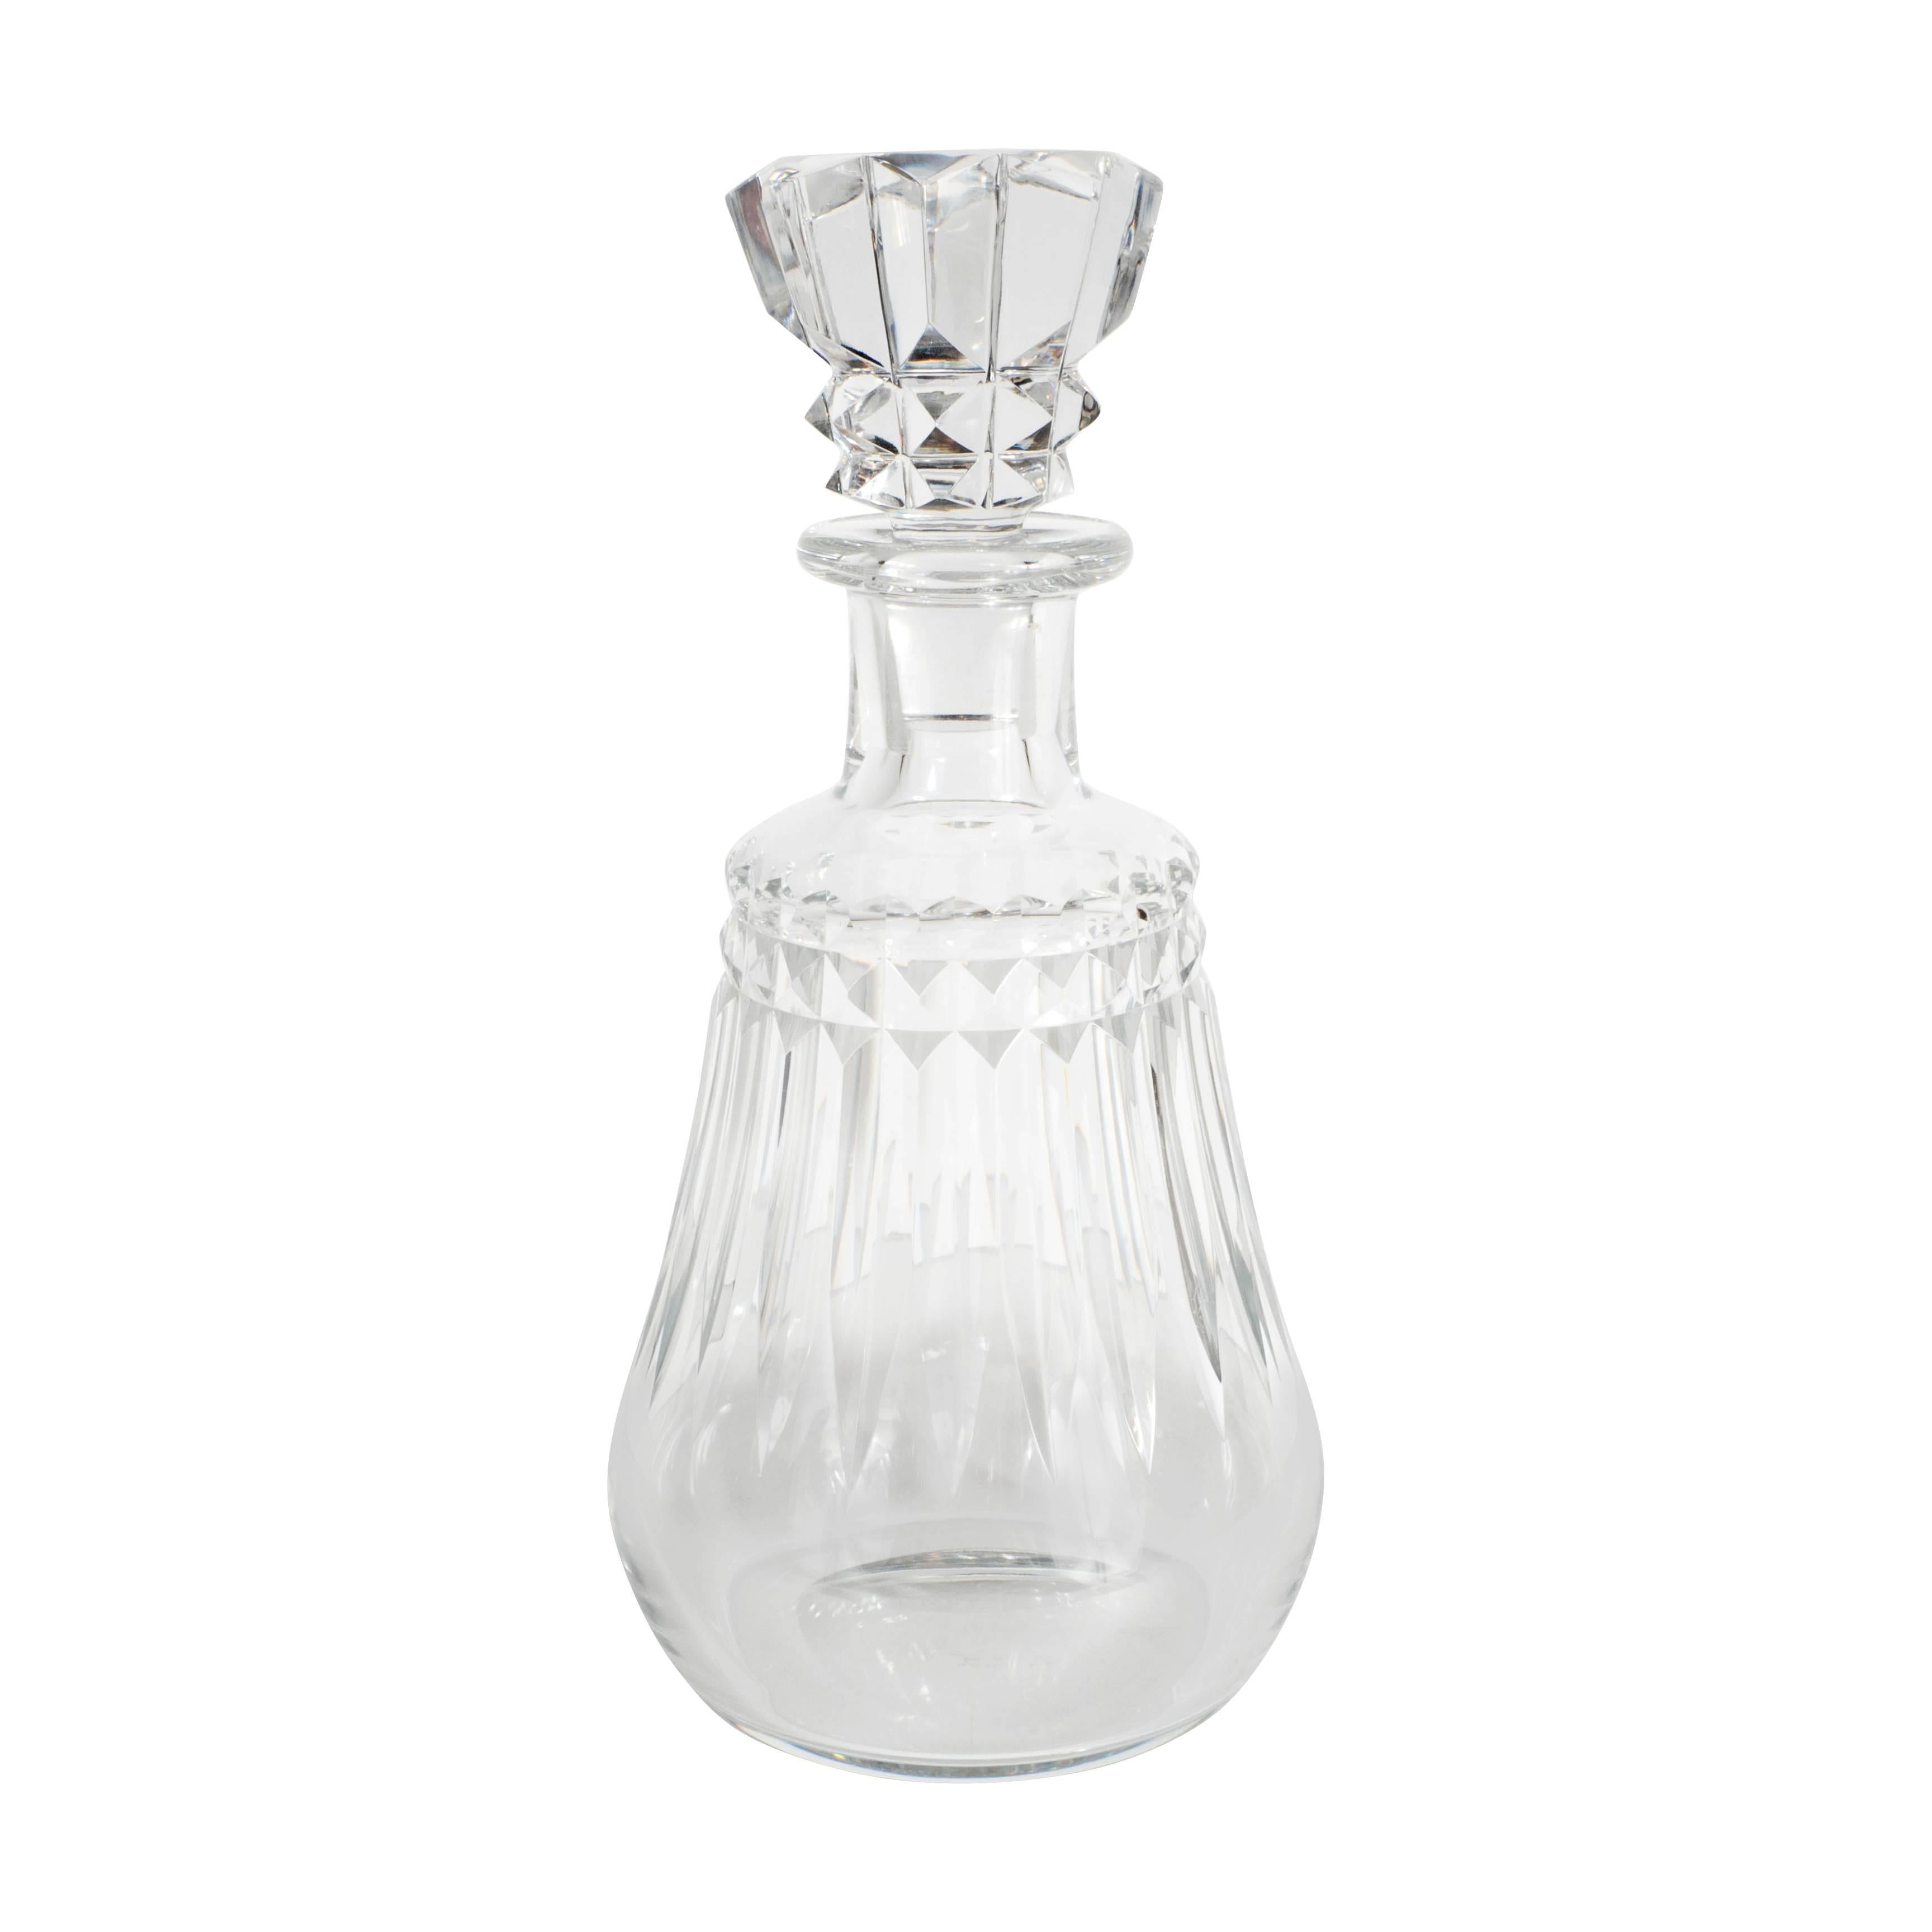 Baccarat "Picadilly" Crystal Decanter with Etched Detailing and Faceted Top